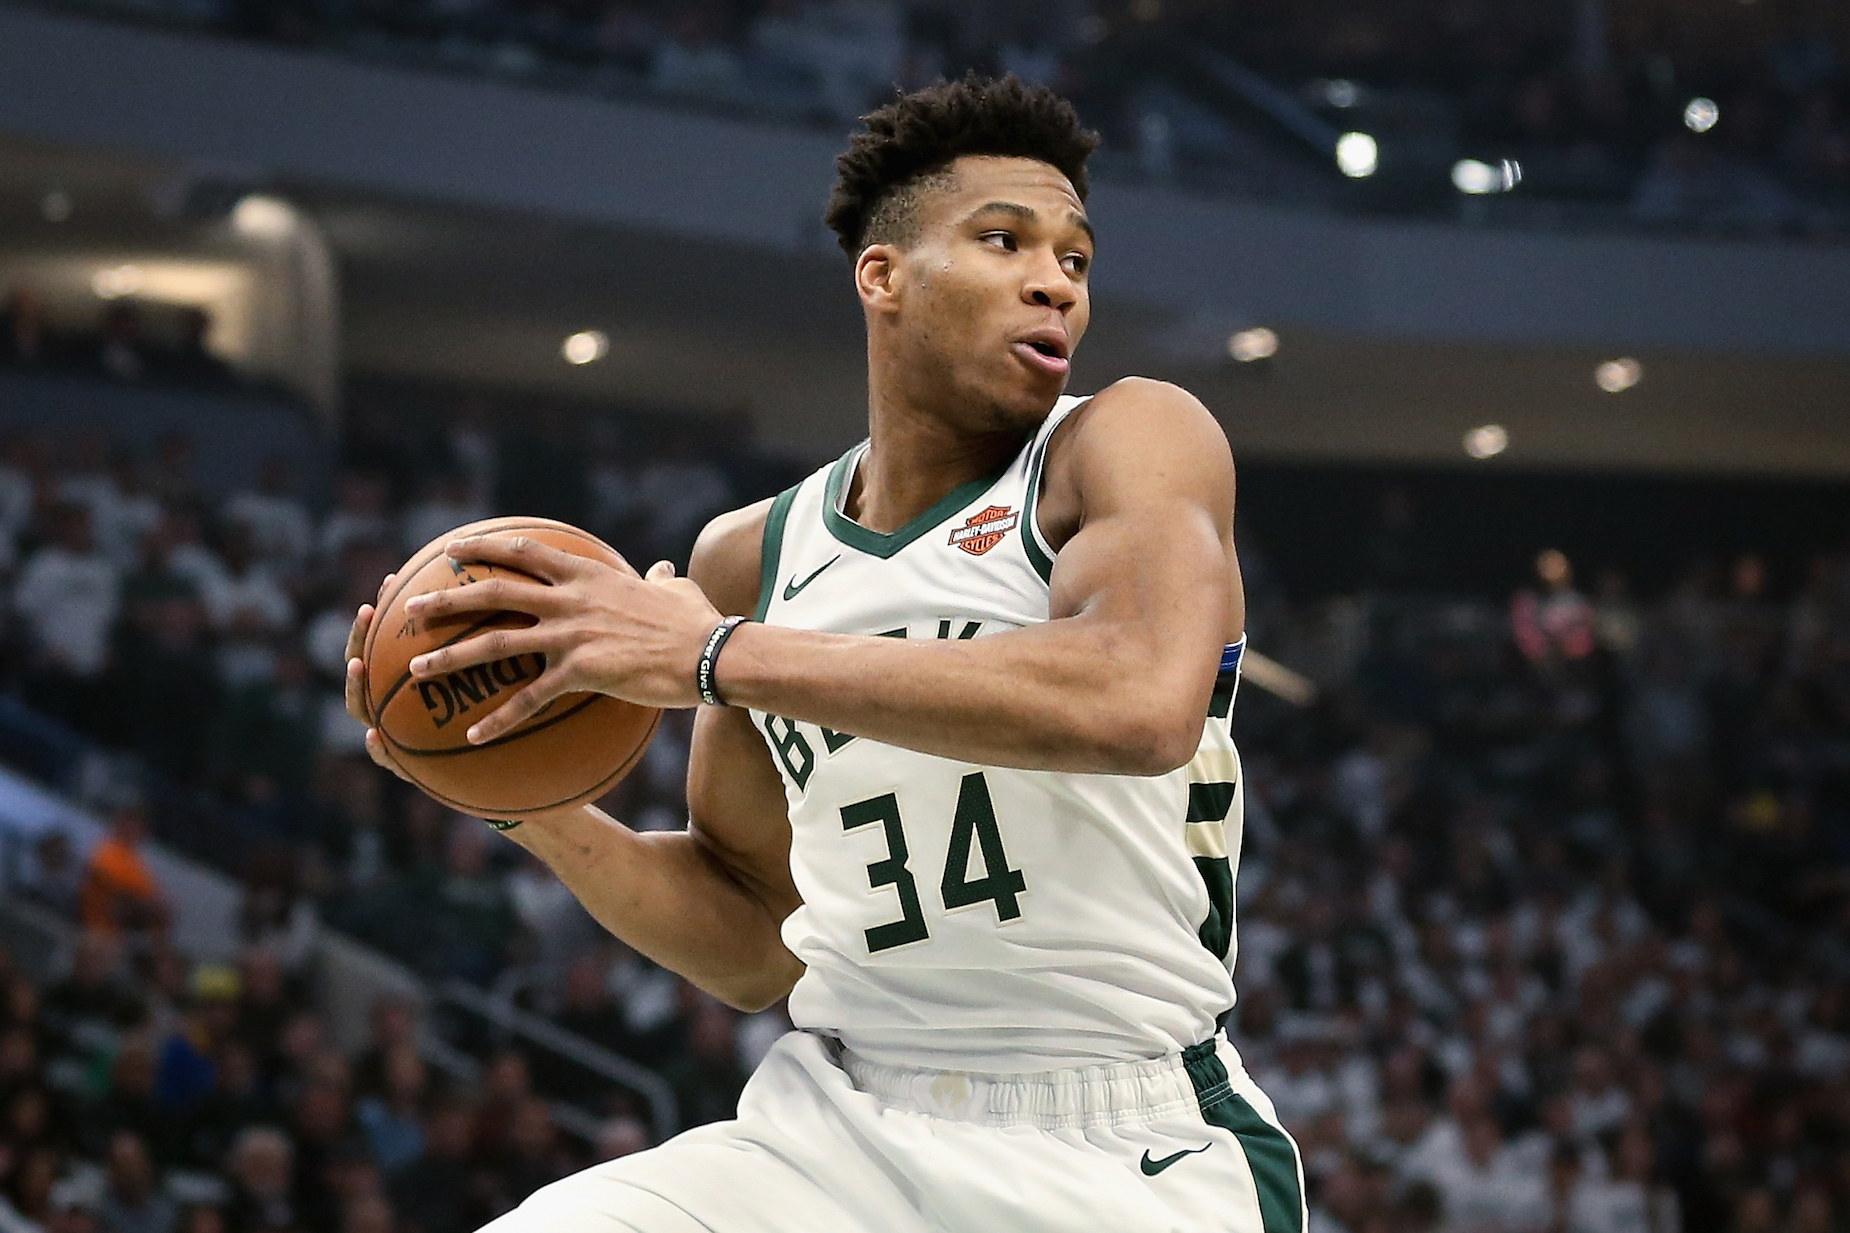 Giannis Antetokounmpo S Massive Hands Are A Key Part Of His Freakish Physique